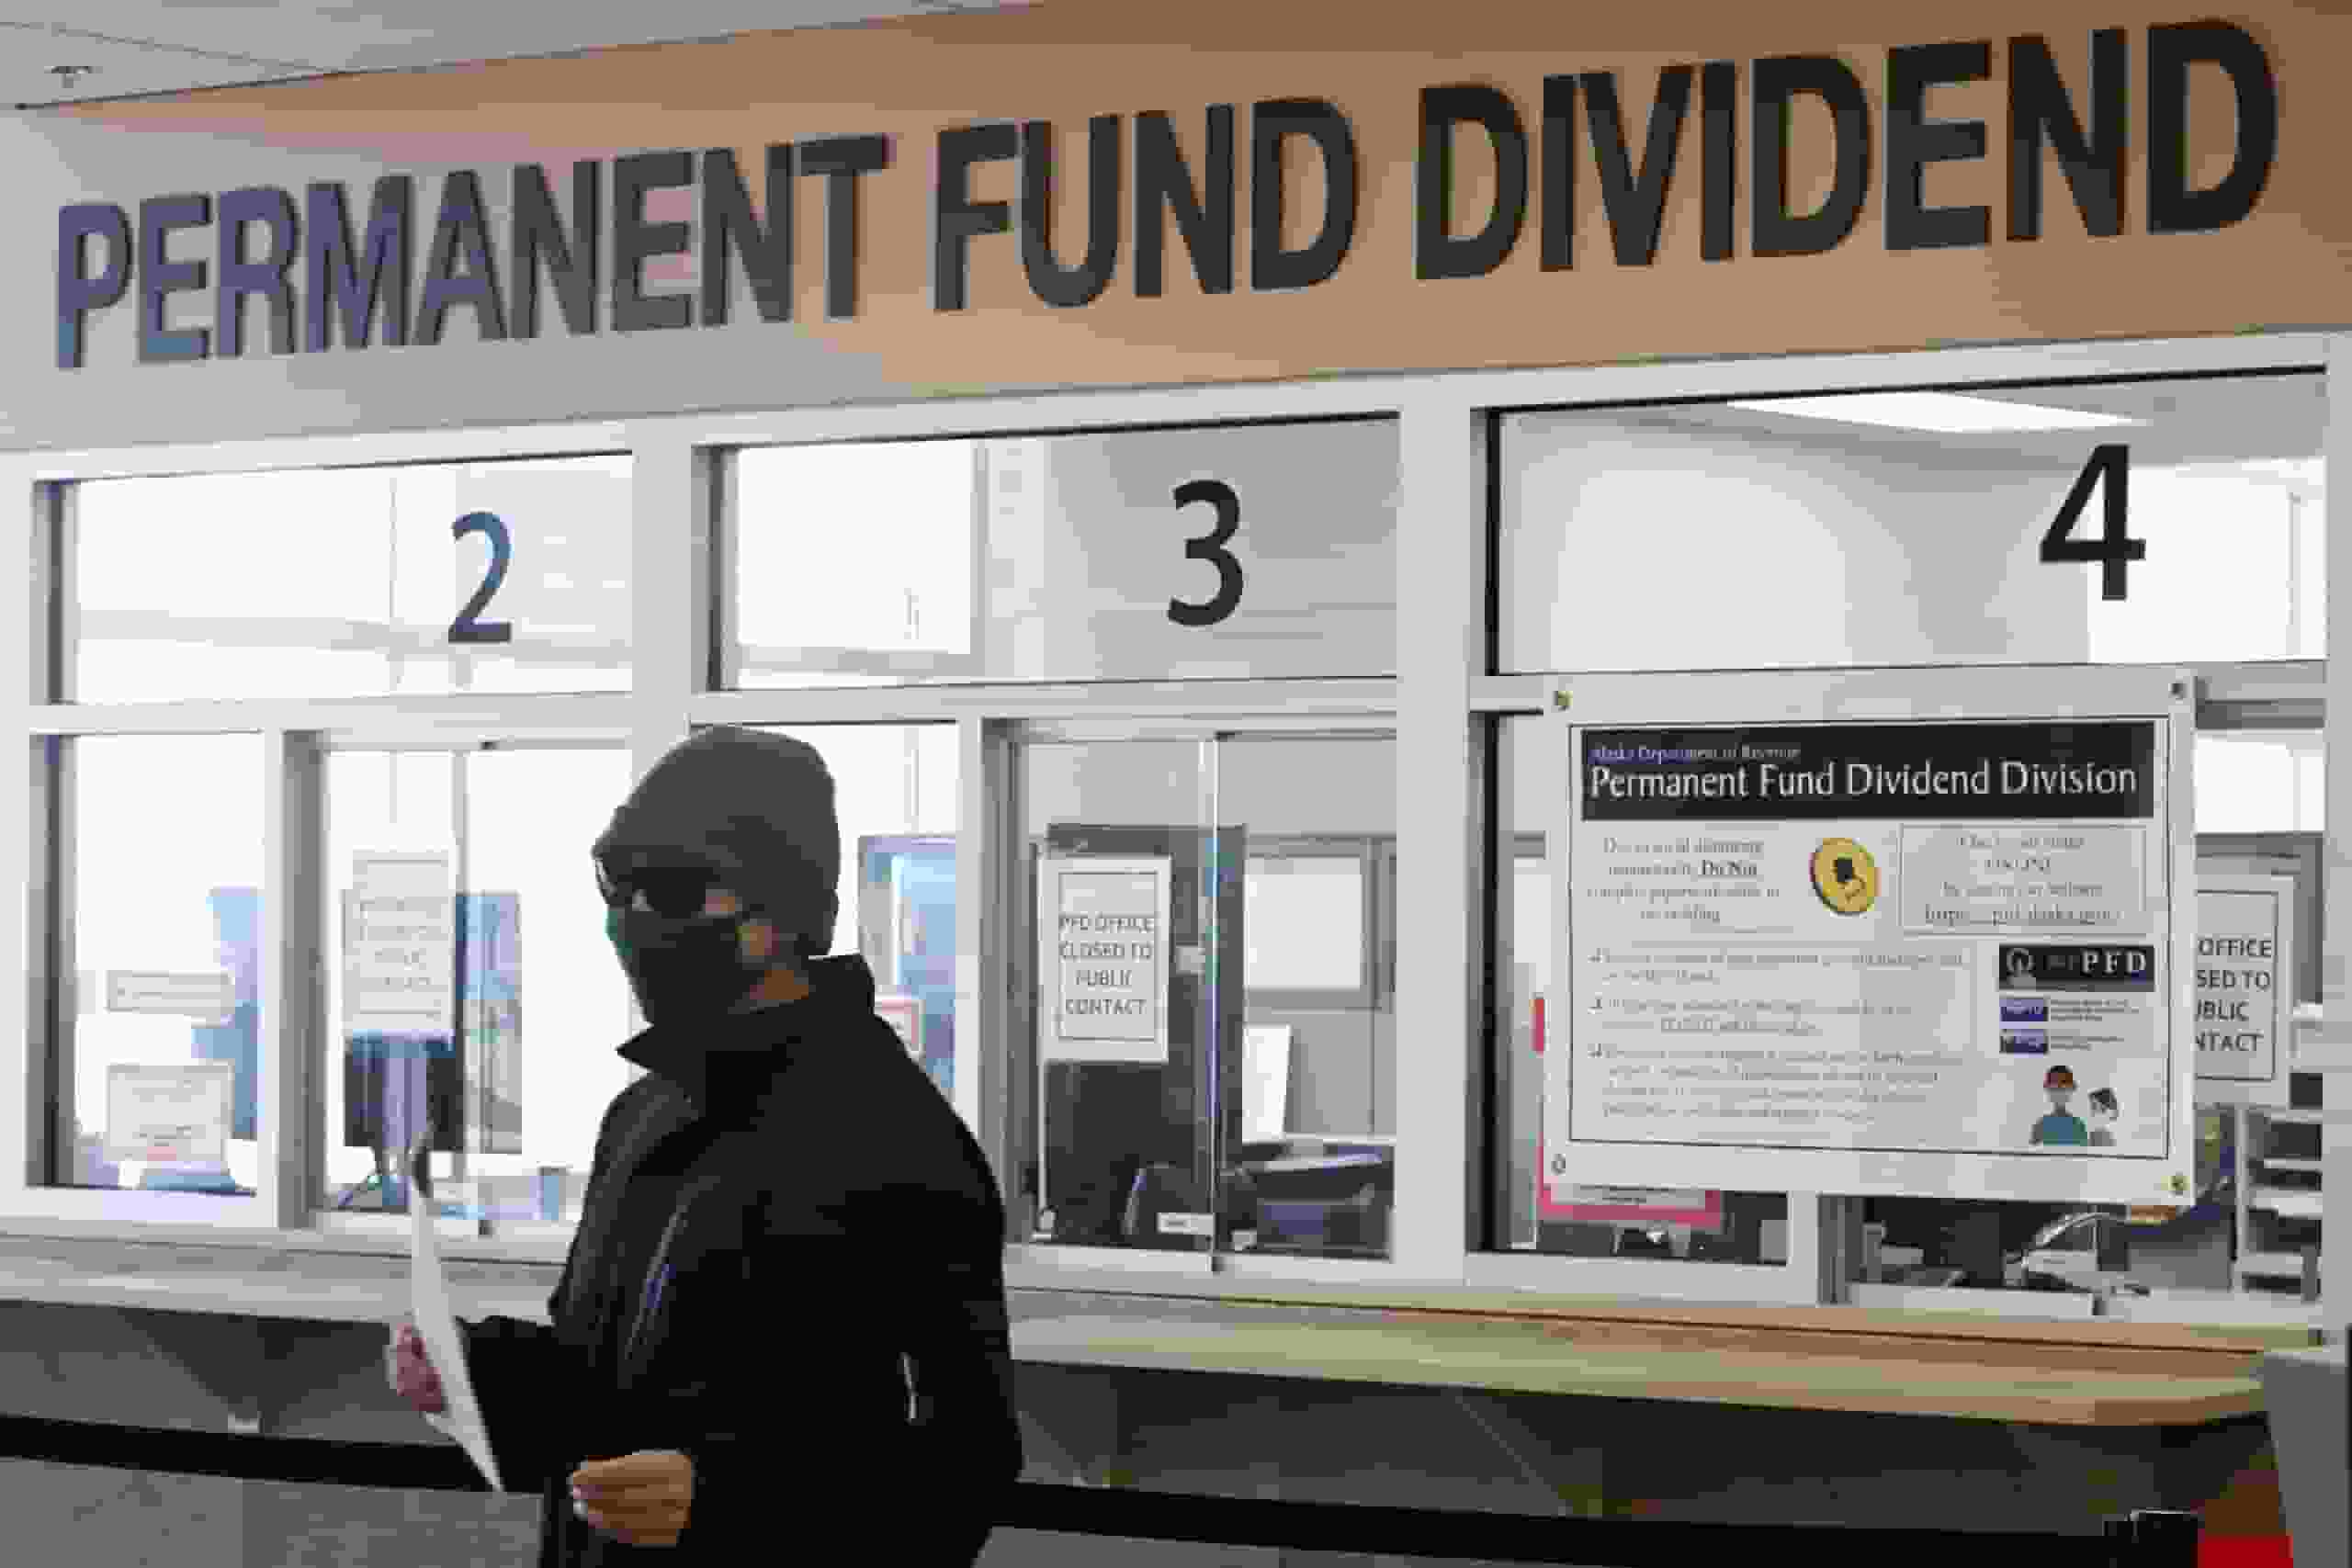 Alaska's Permanent Fund Dividend [Photo: Anchorage Daily News]